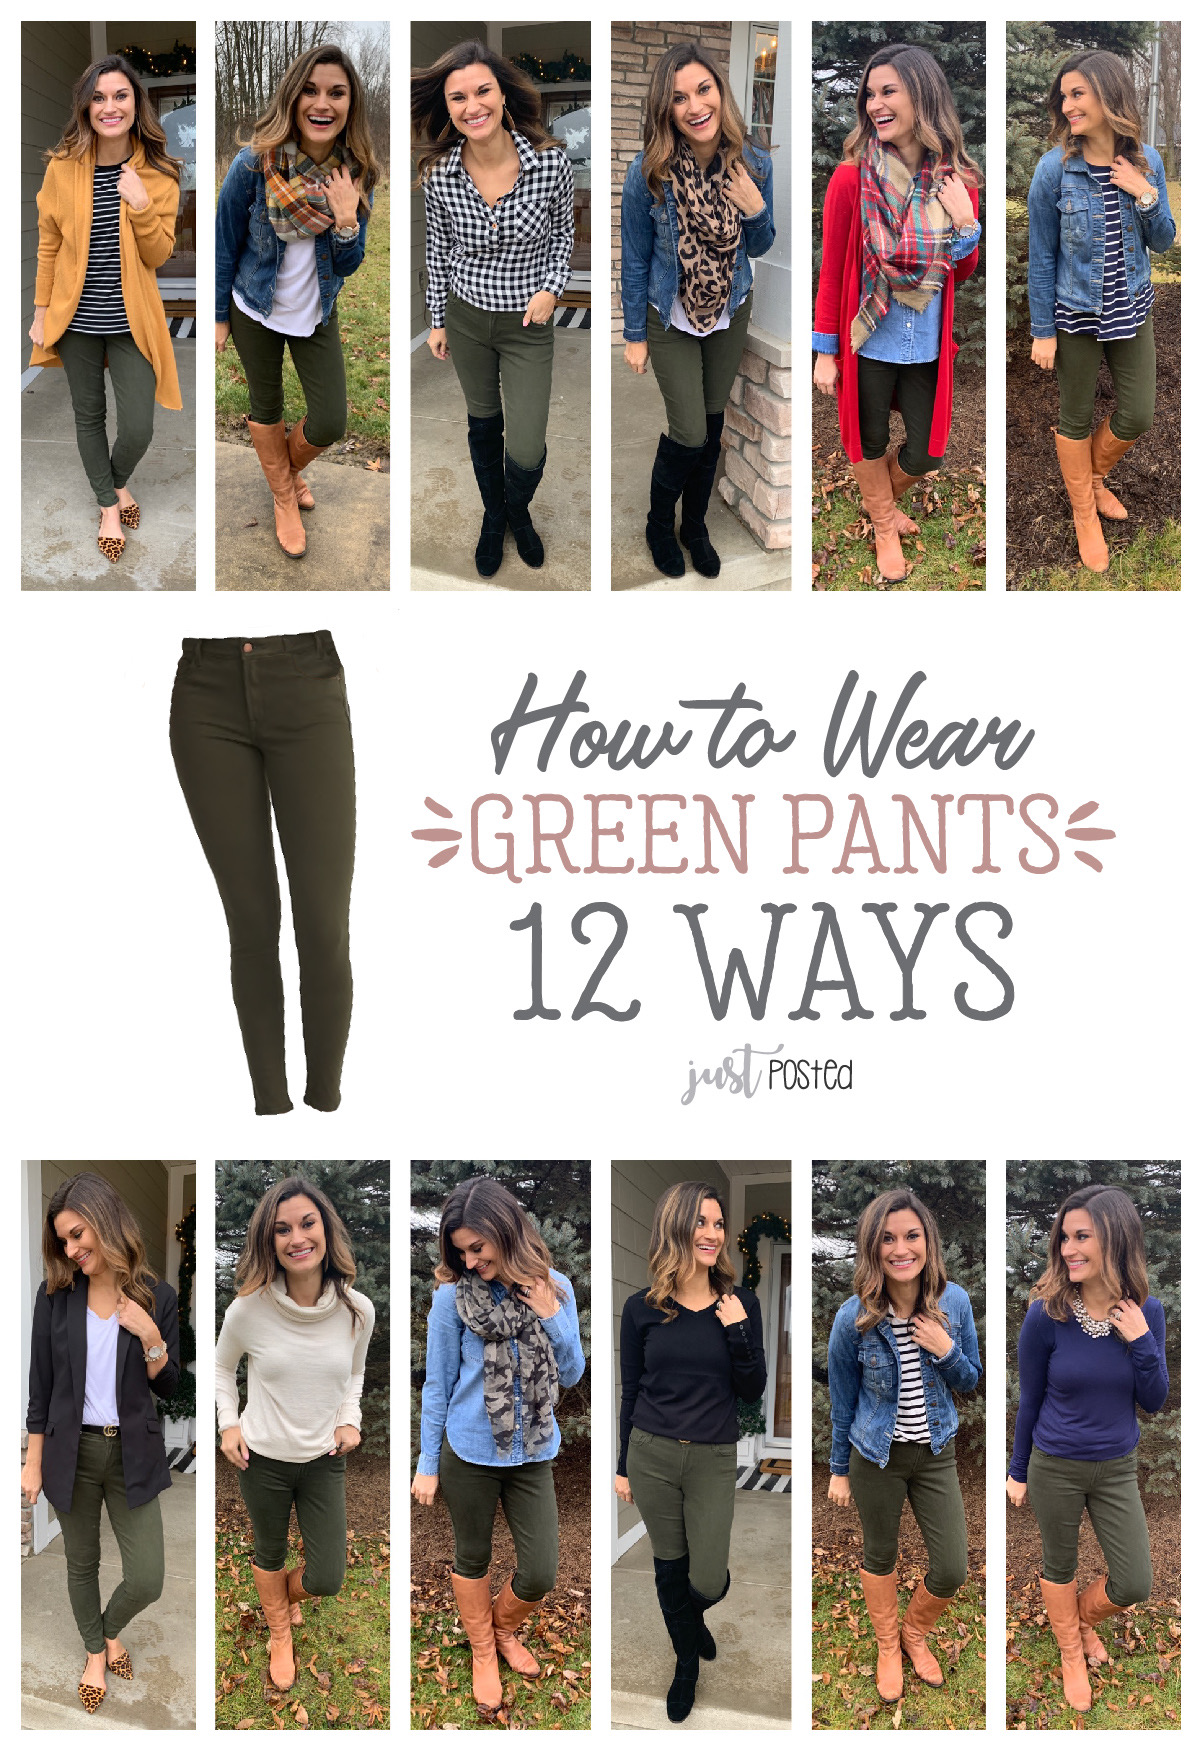 Twelve Ways to Wear Green Pants – Just Posted